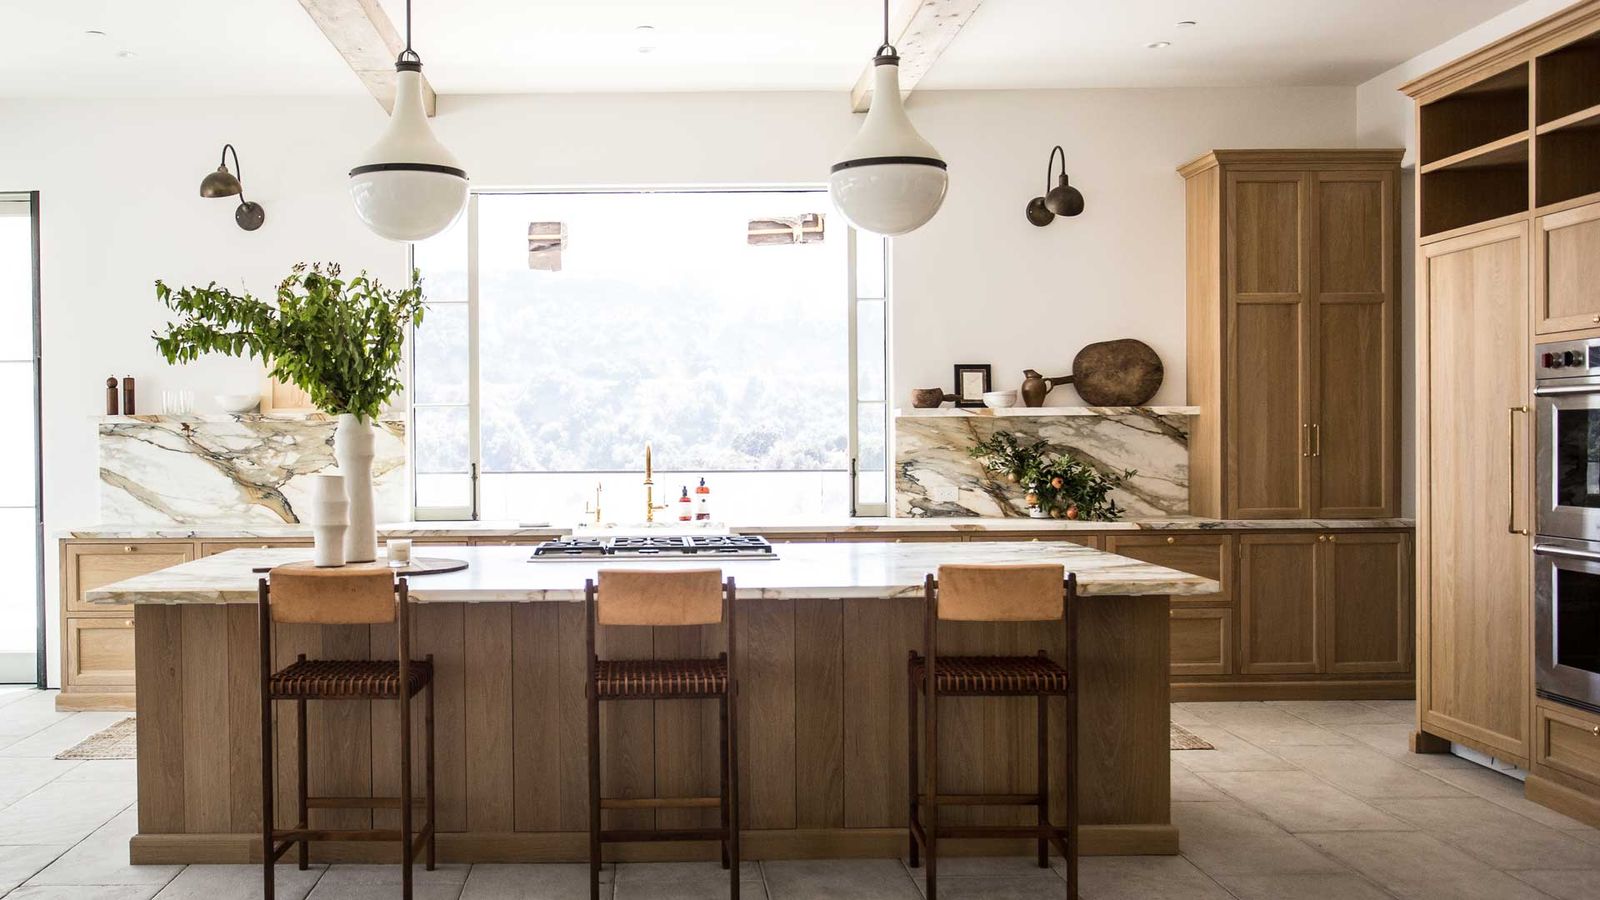 See this beautiful kitchen and bathroom by John Legend and Chrissy ...